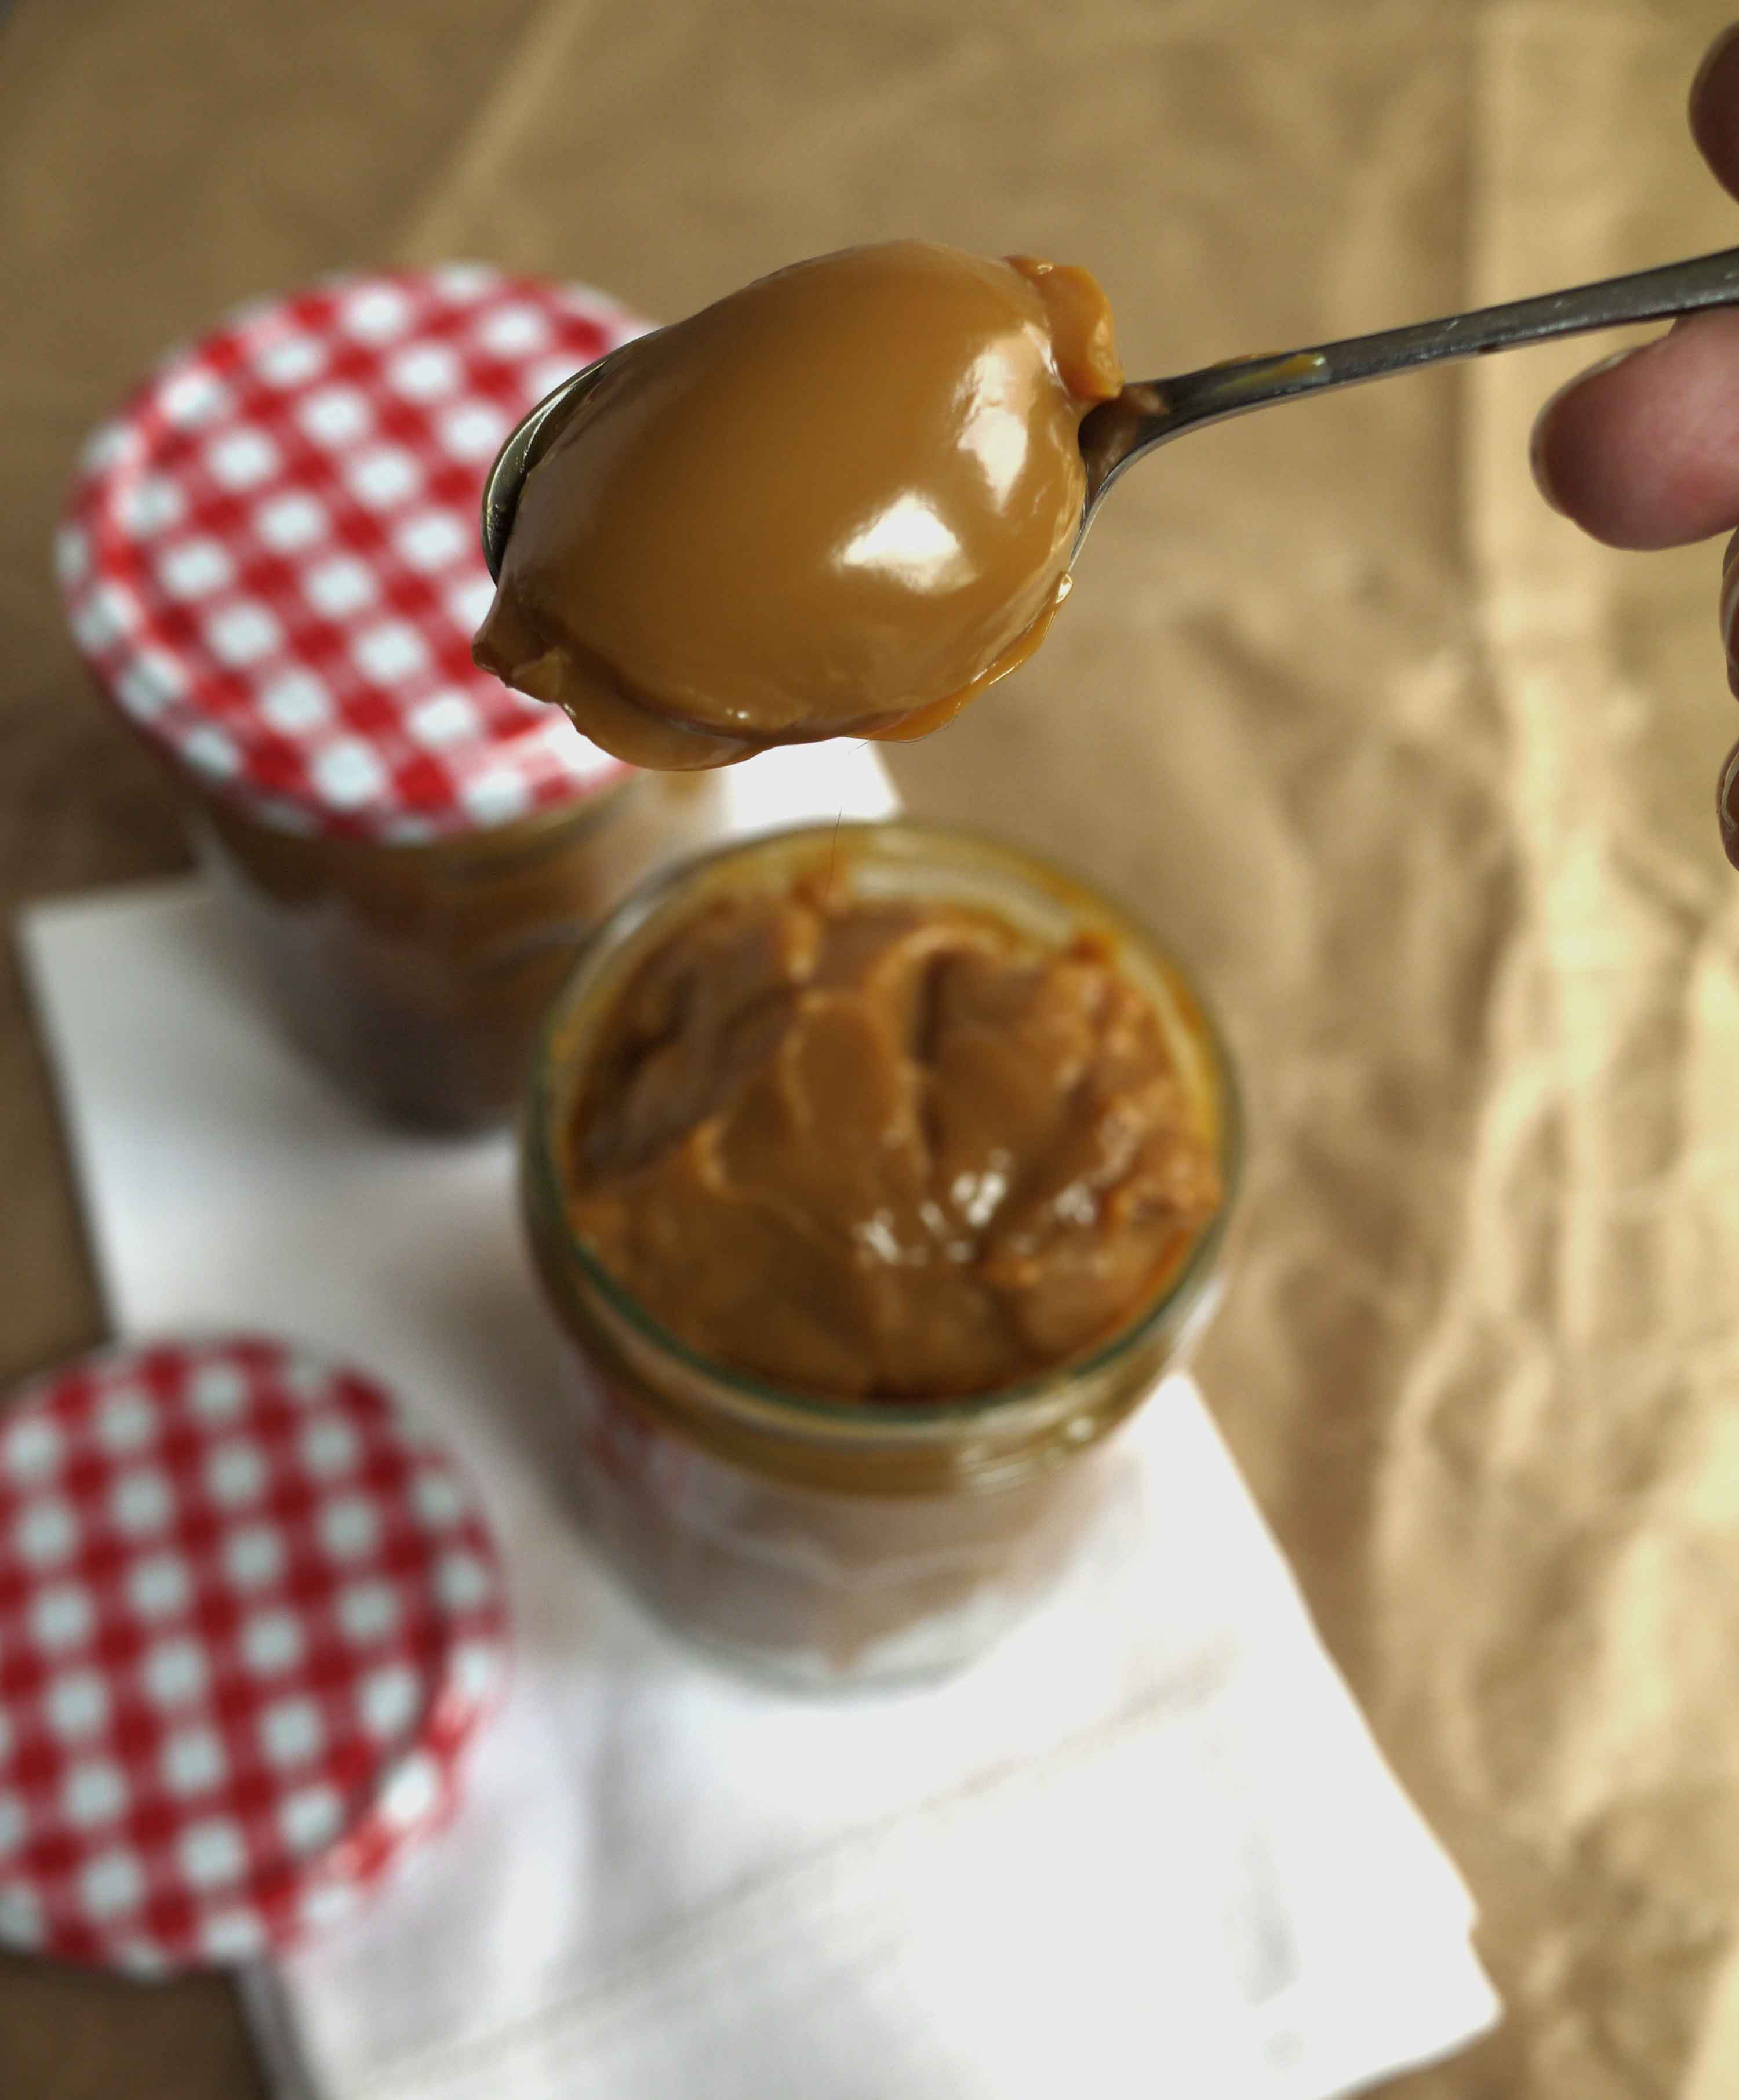 Slow cooker (crock pot) home made condensed milk caramel sauce, made without cream or fuss